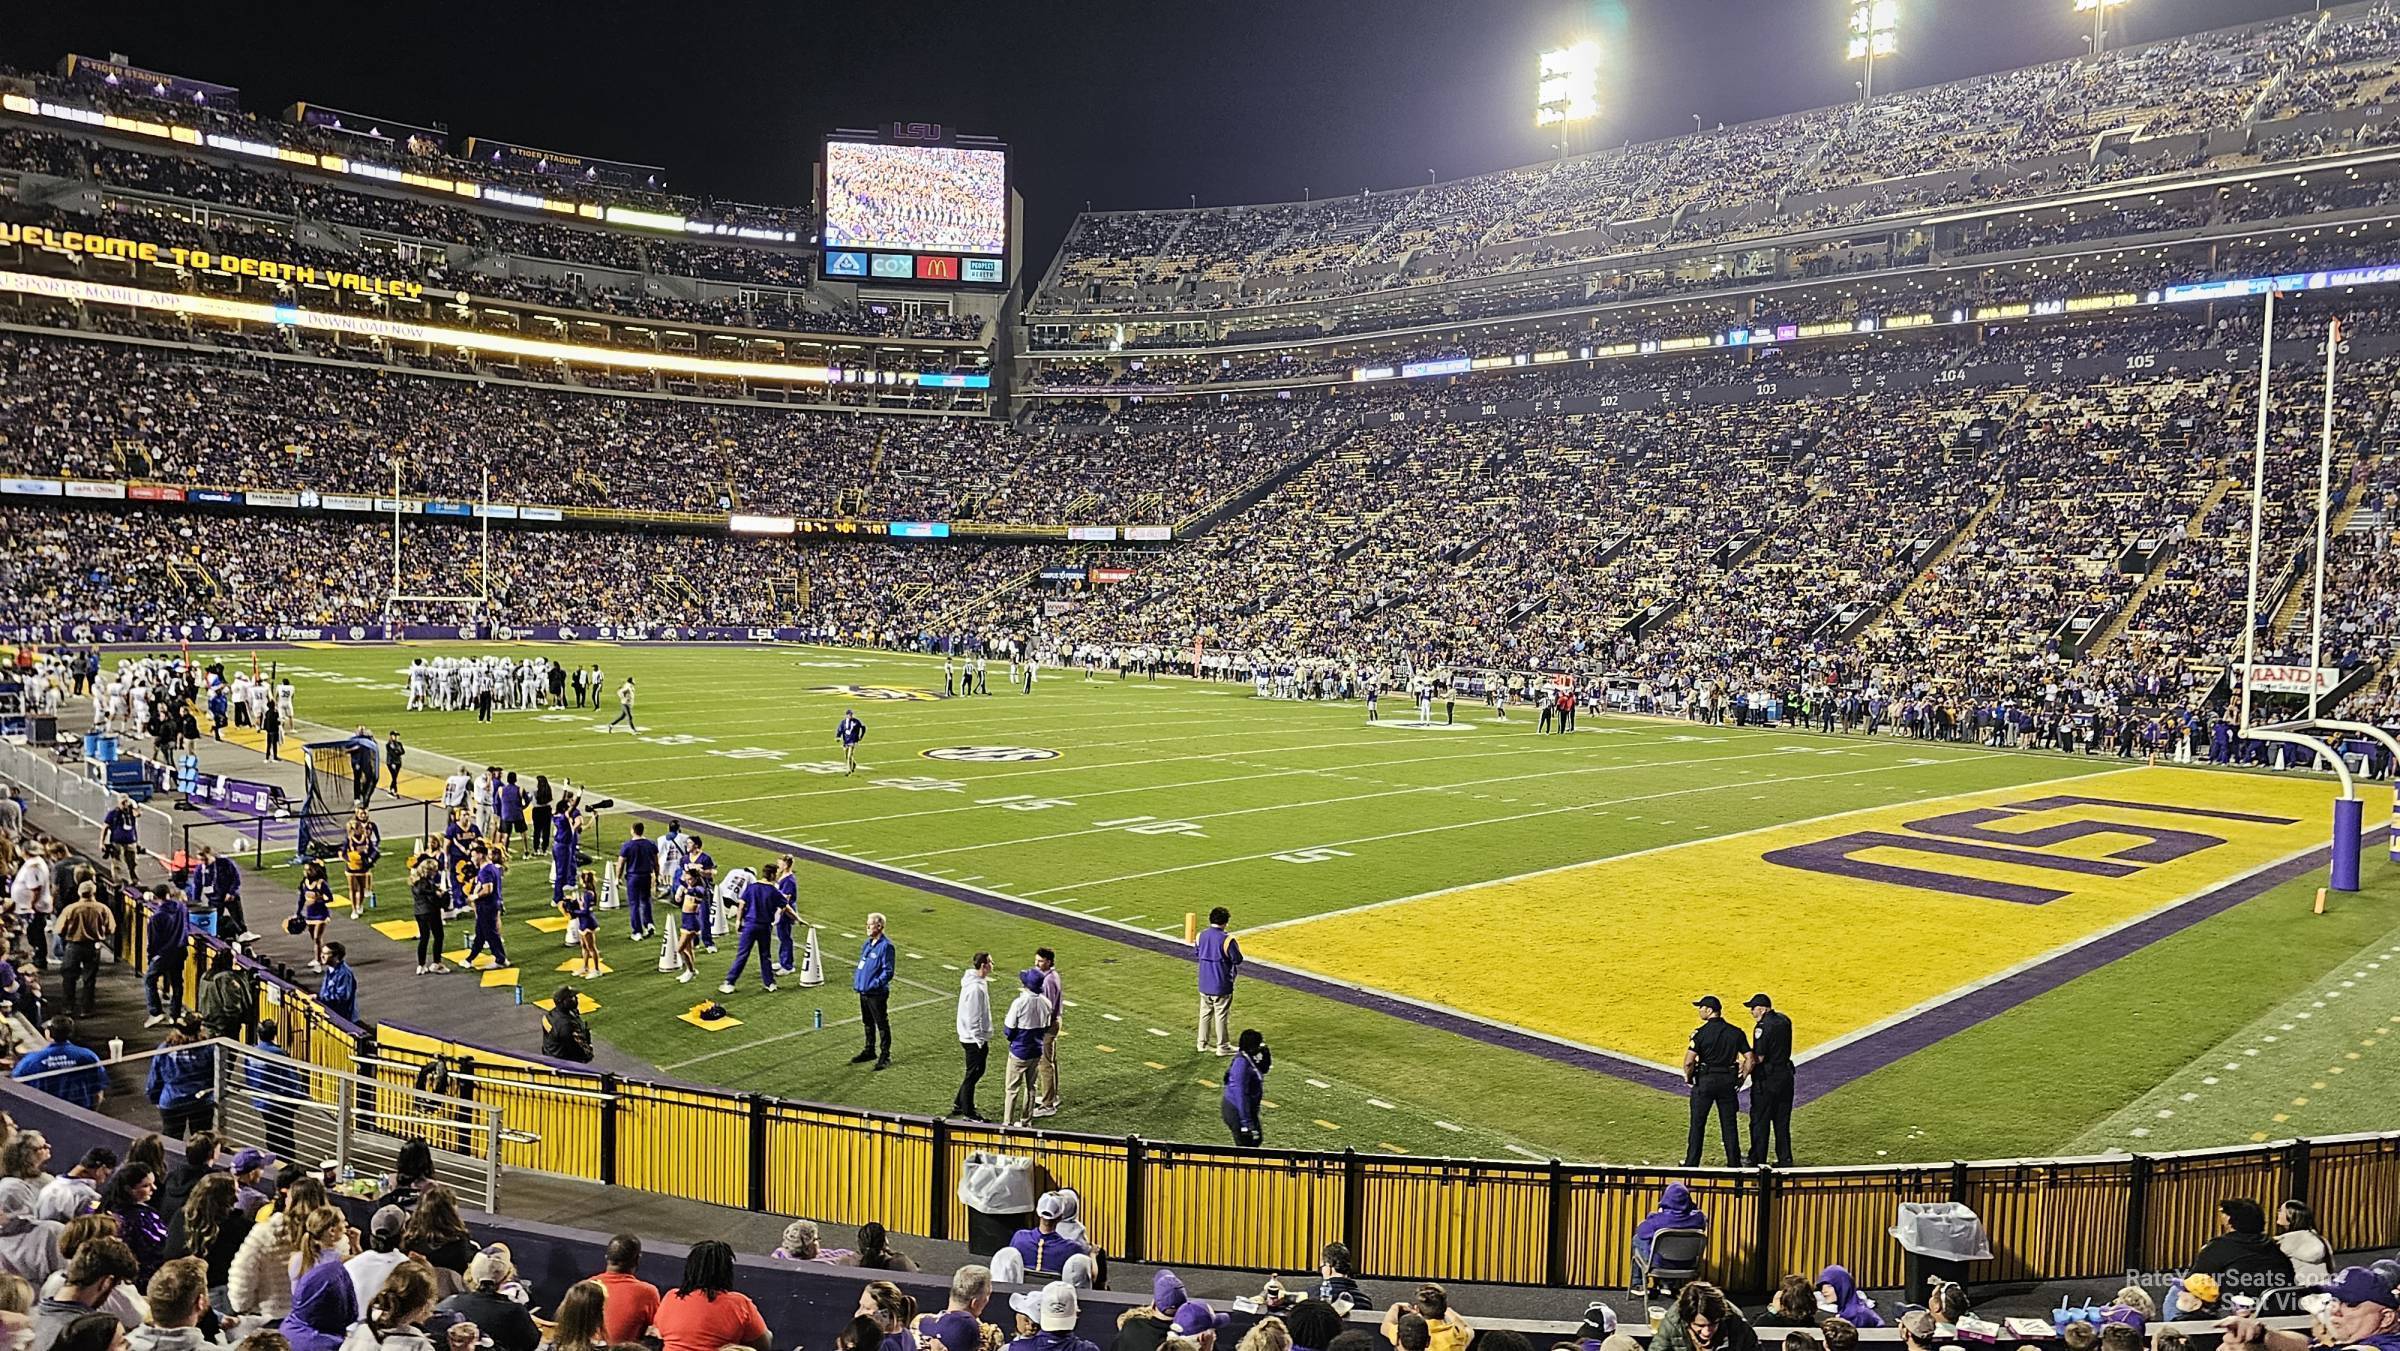 section 209, row 13 seat view  - tiger stadium